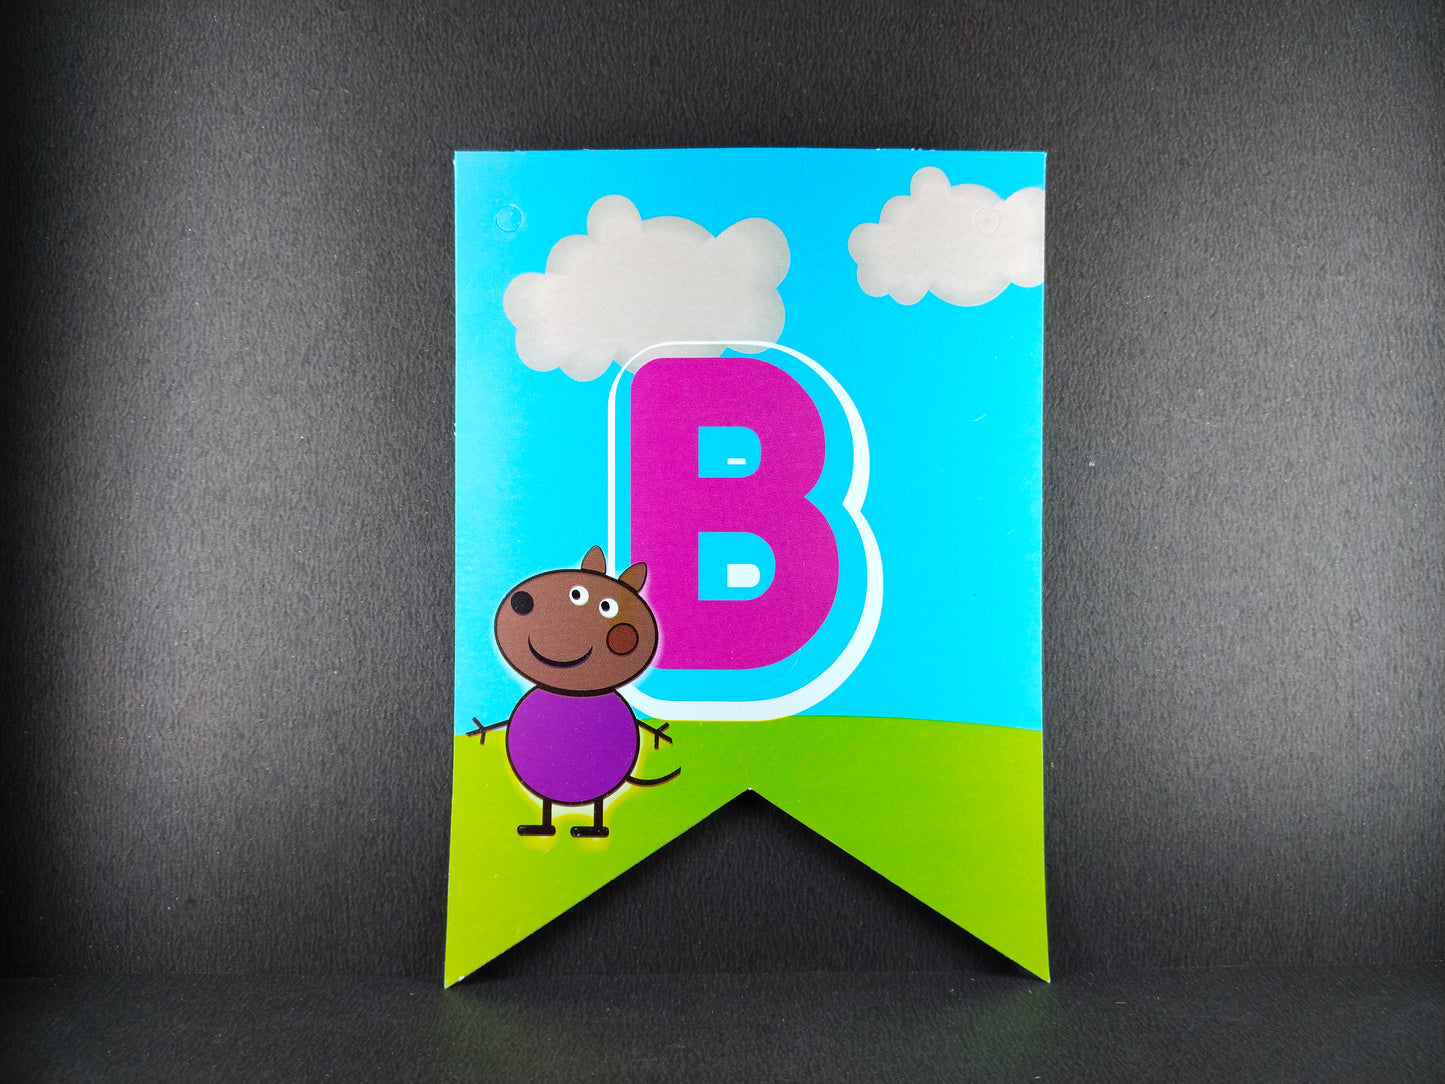 Birthday Banner - Peppa Pig Theme for Simple Birthday Decorations at Home